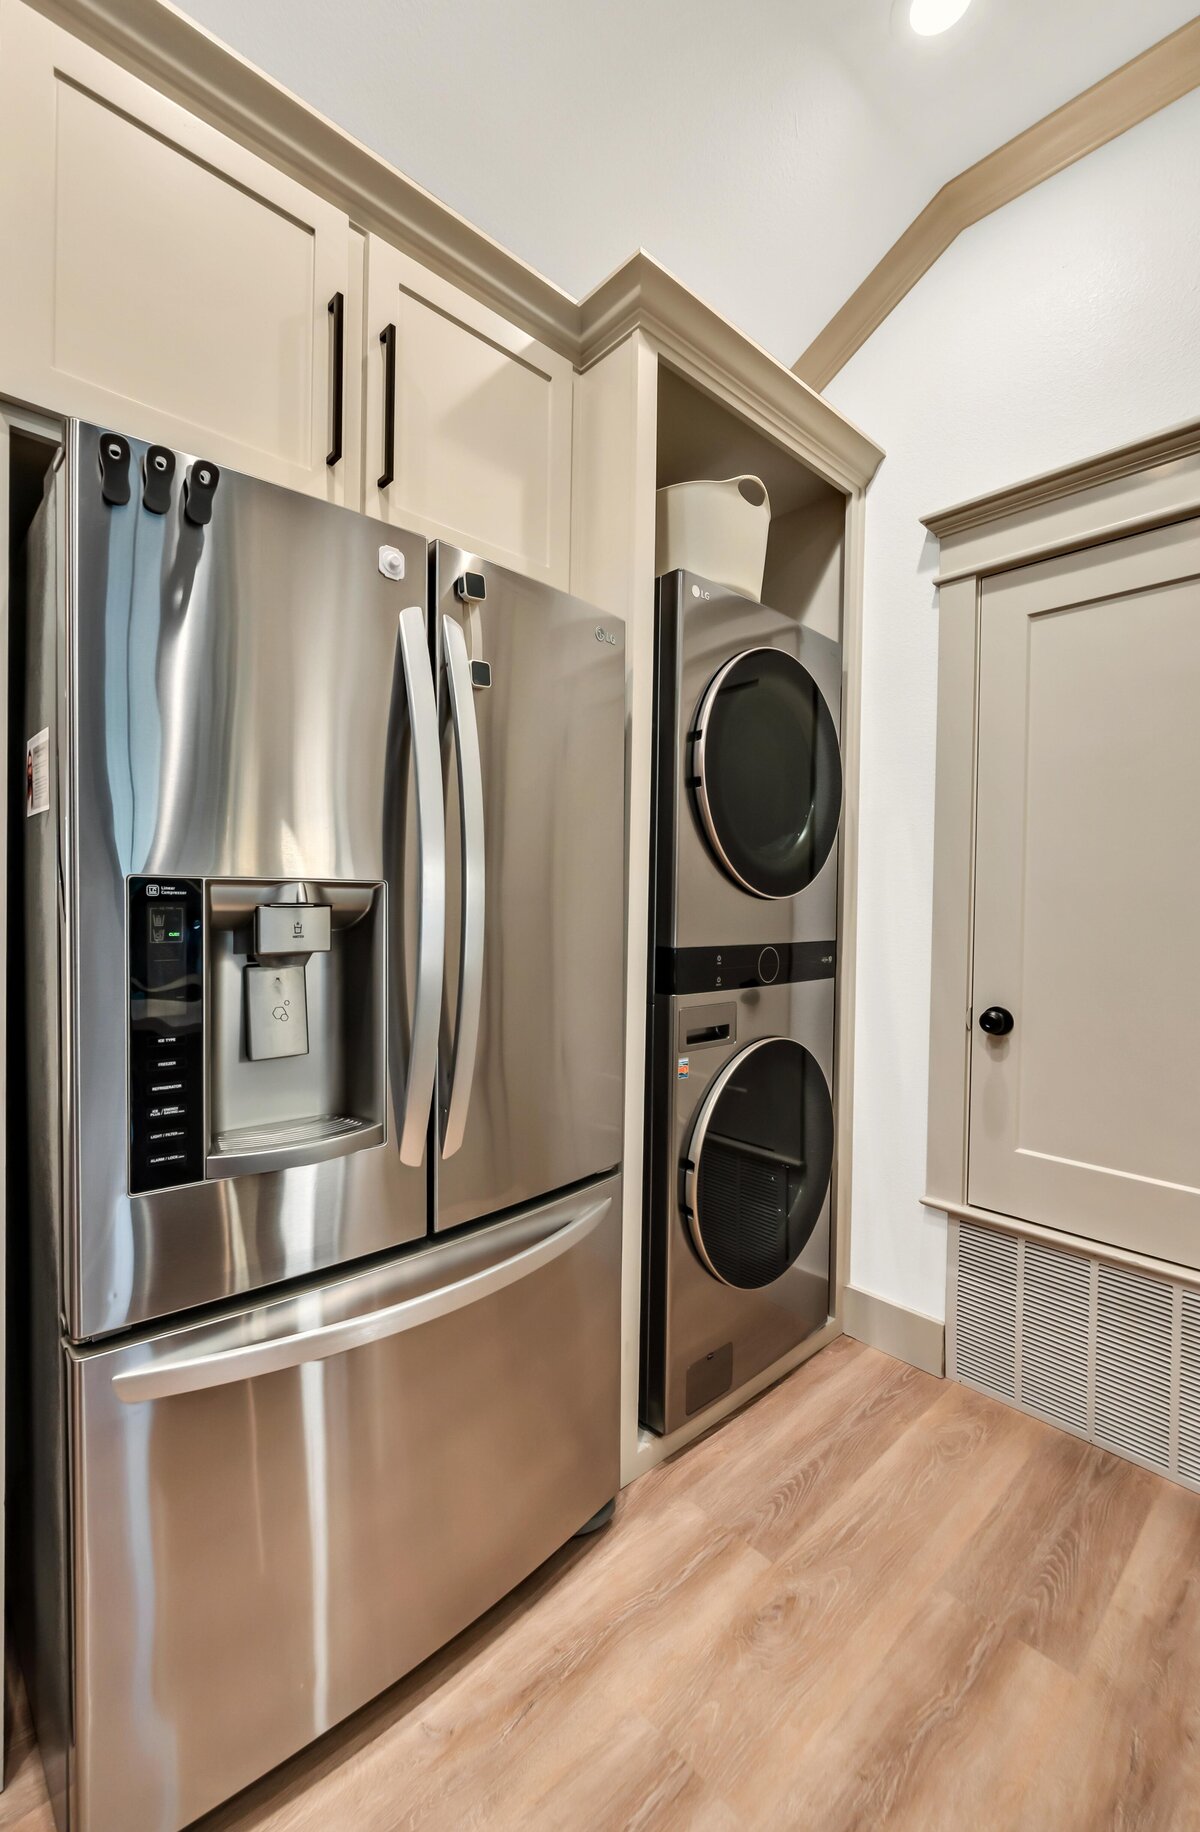 Laundry area with washer and dryer in this three-bedroom, three-bathroom vacation rental home with free wifi, outdoor theater, hot tub, propane grill and private yard in Waco, TX.